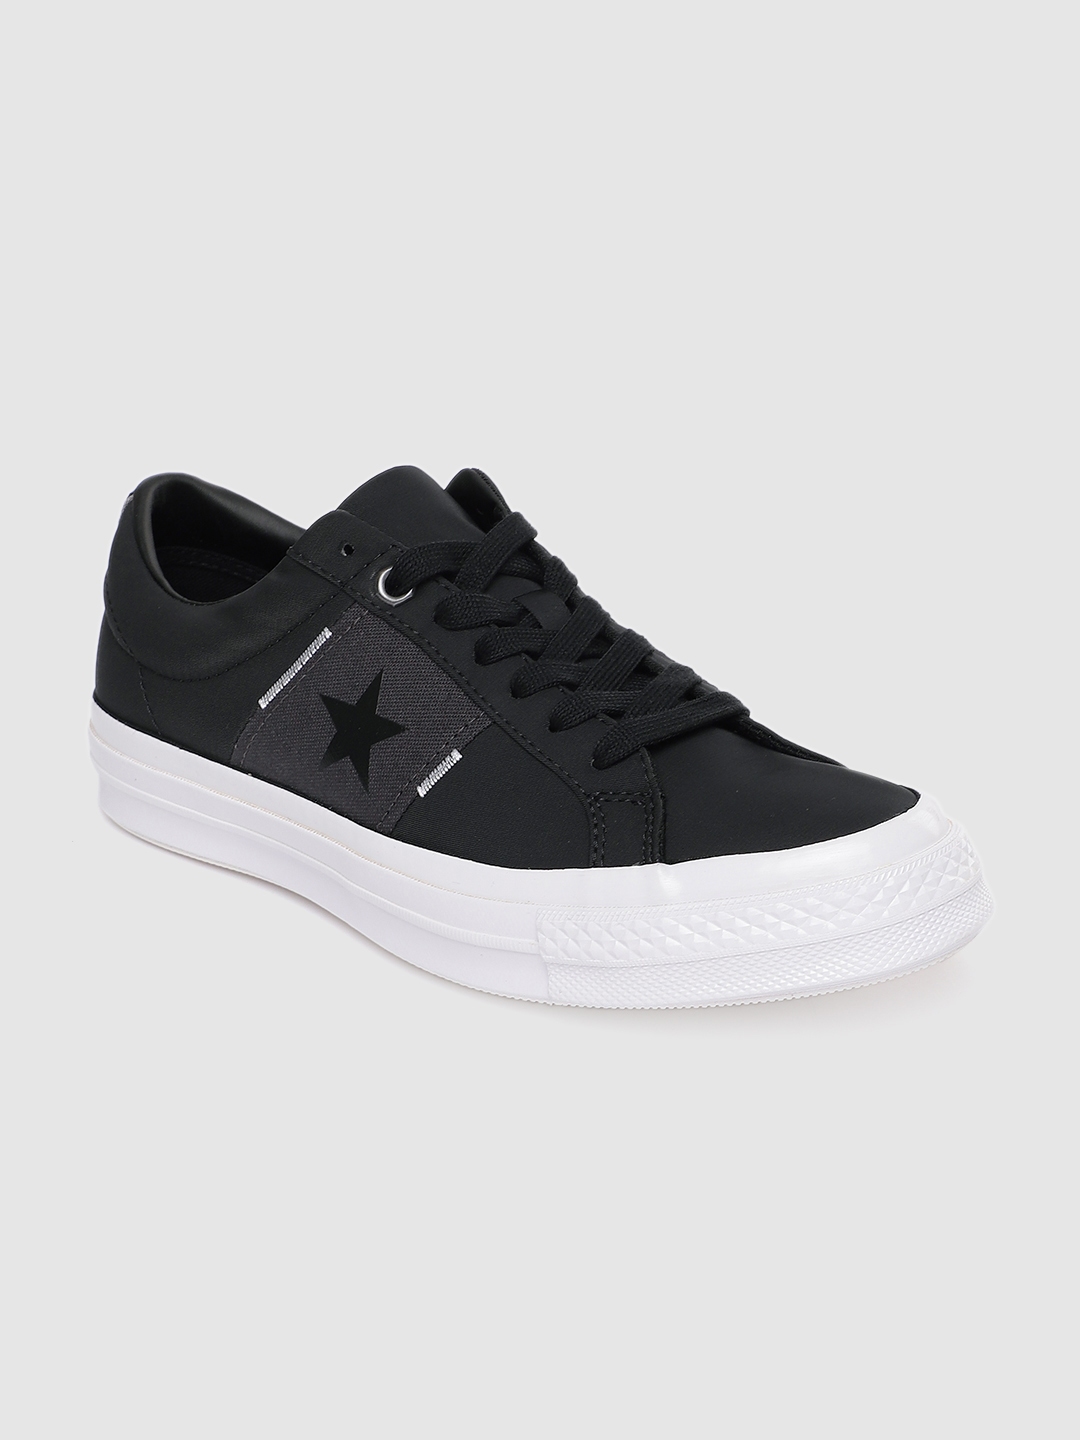 Buy Converse Unisex Black Sneakers - Casual Shoes for Unisex 10334443 ...